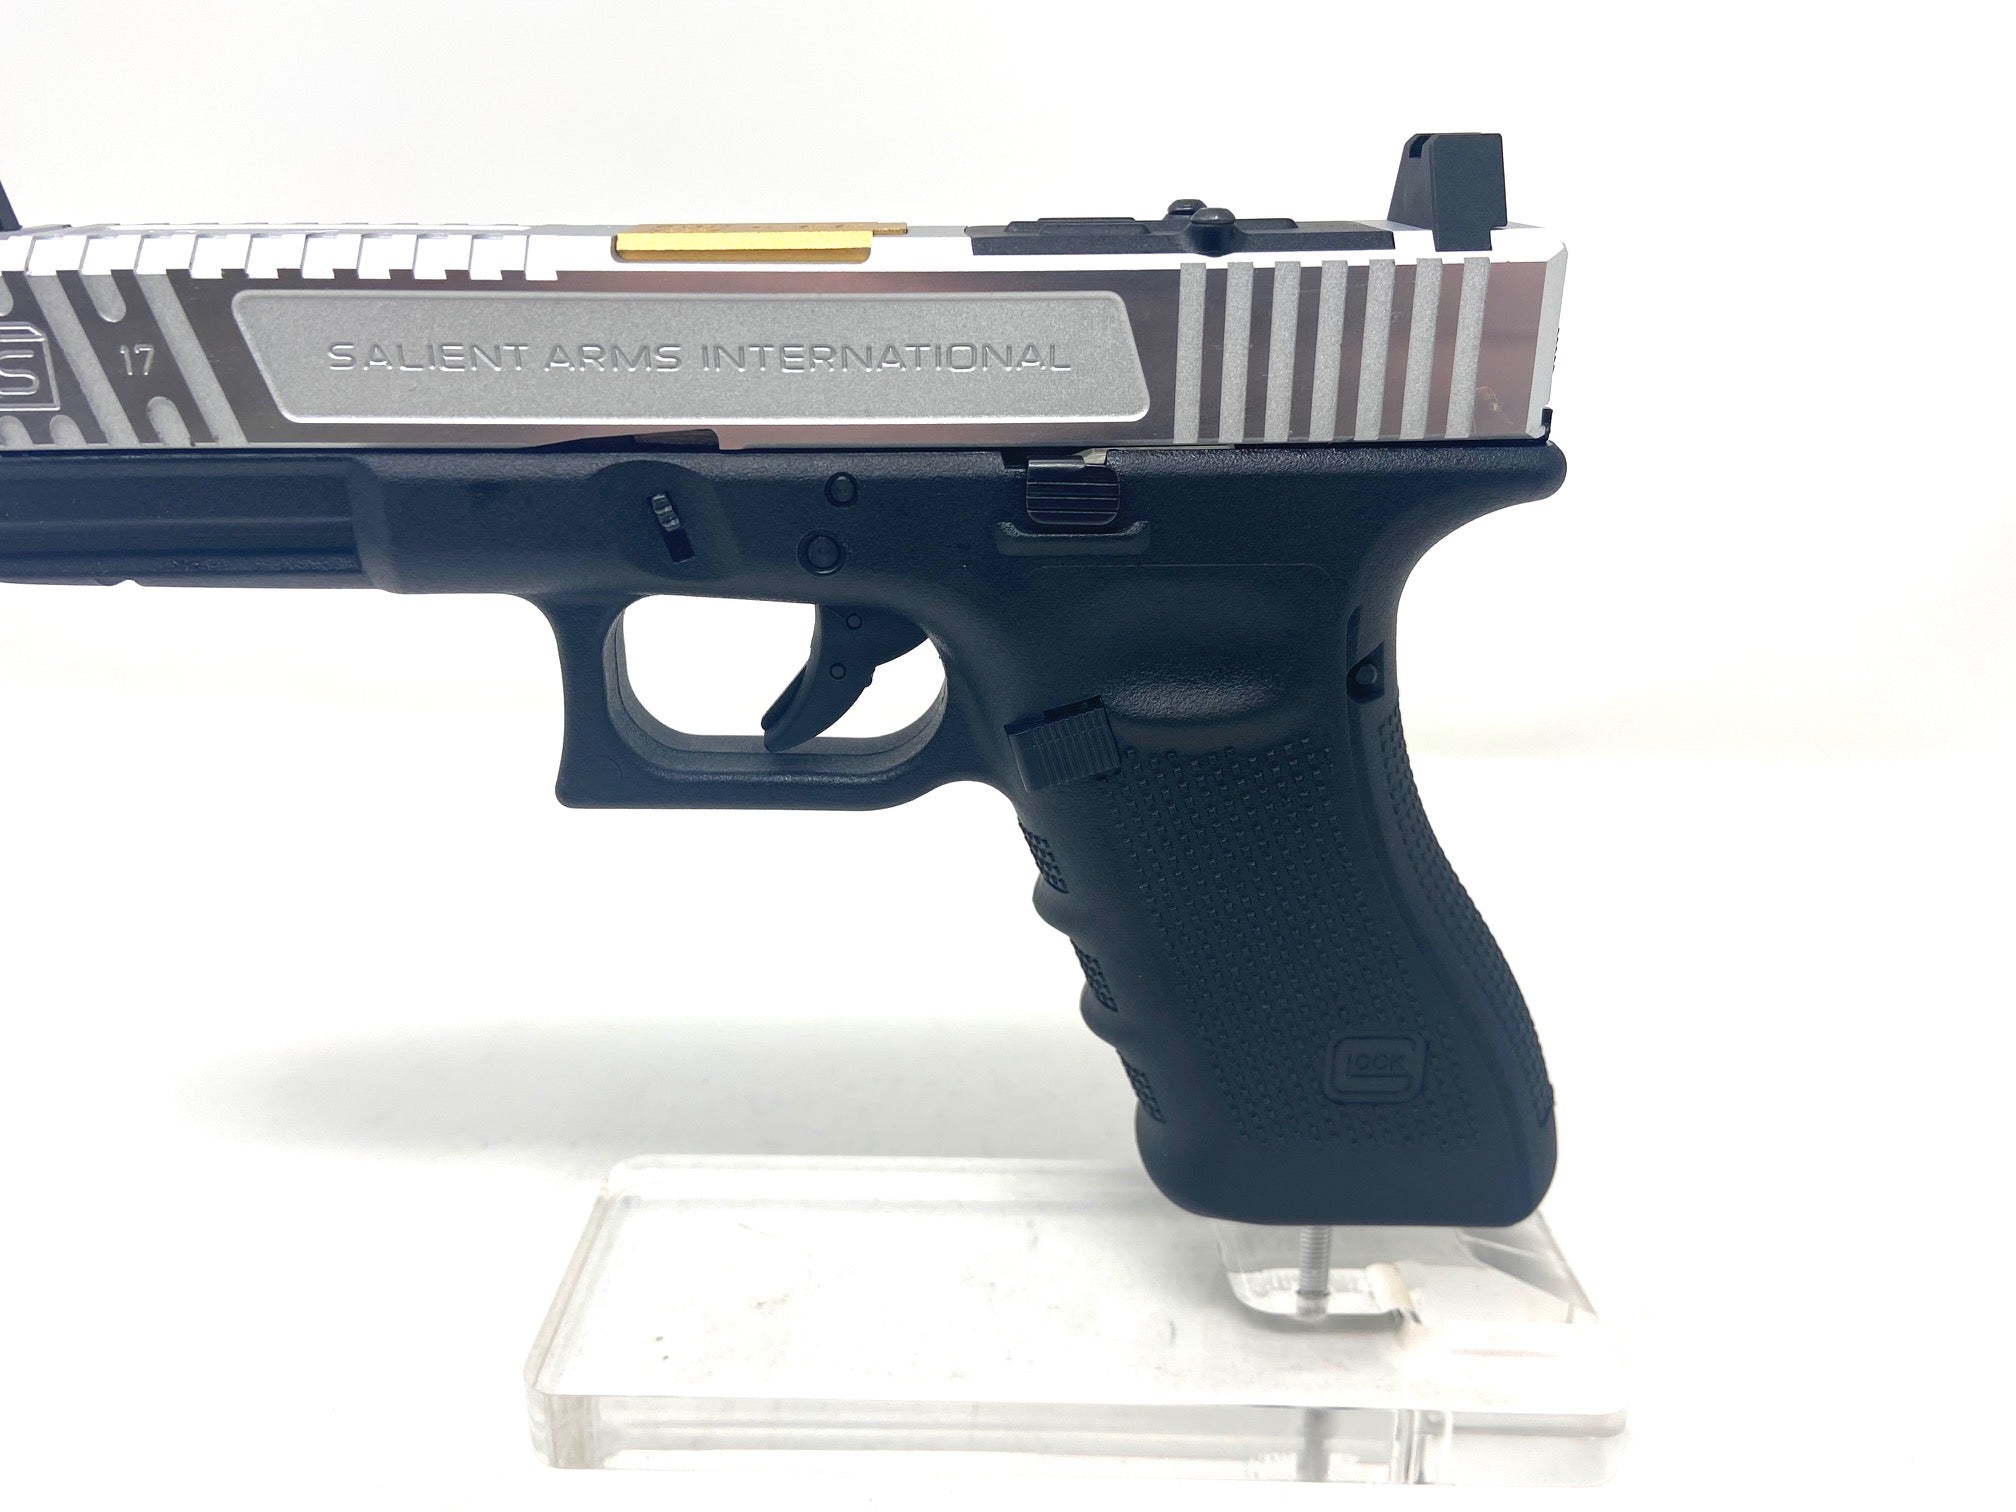 SS Custom Glock 17 Salient Arms Silver/Gold with RMR Cut - ssairsoft.com